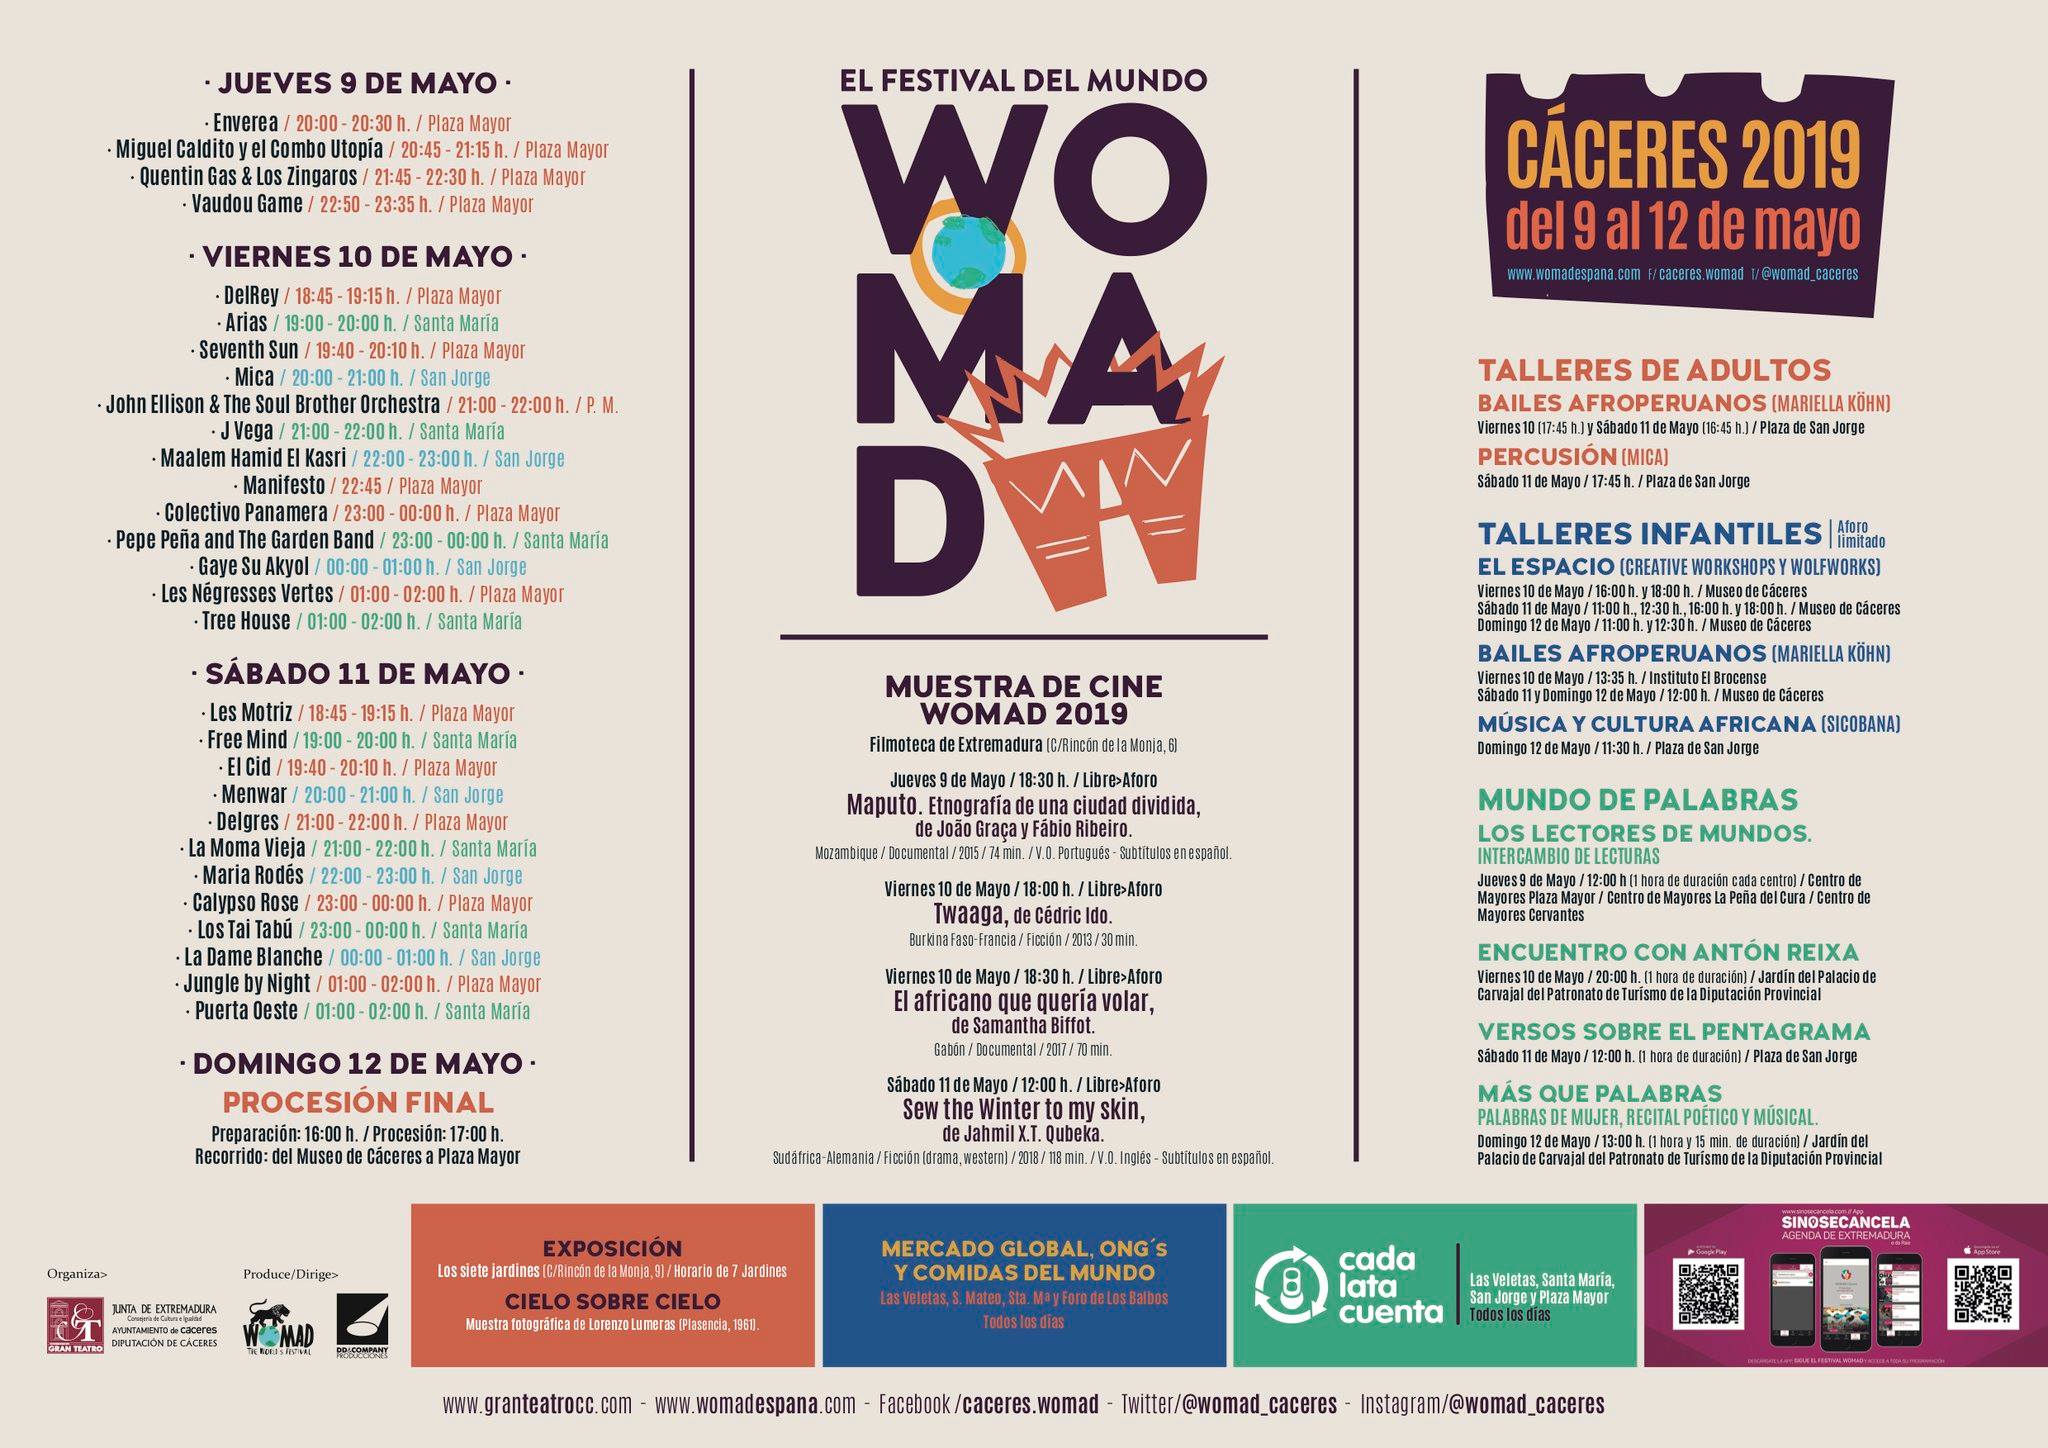 WOMAD 2019 - Cáceres 2